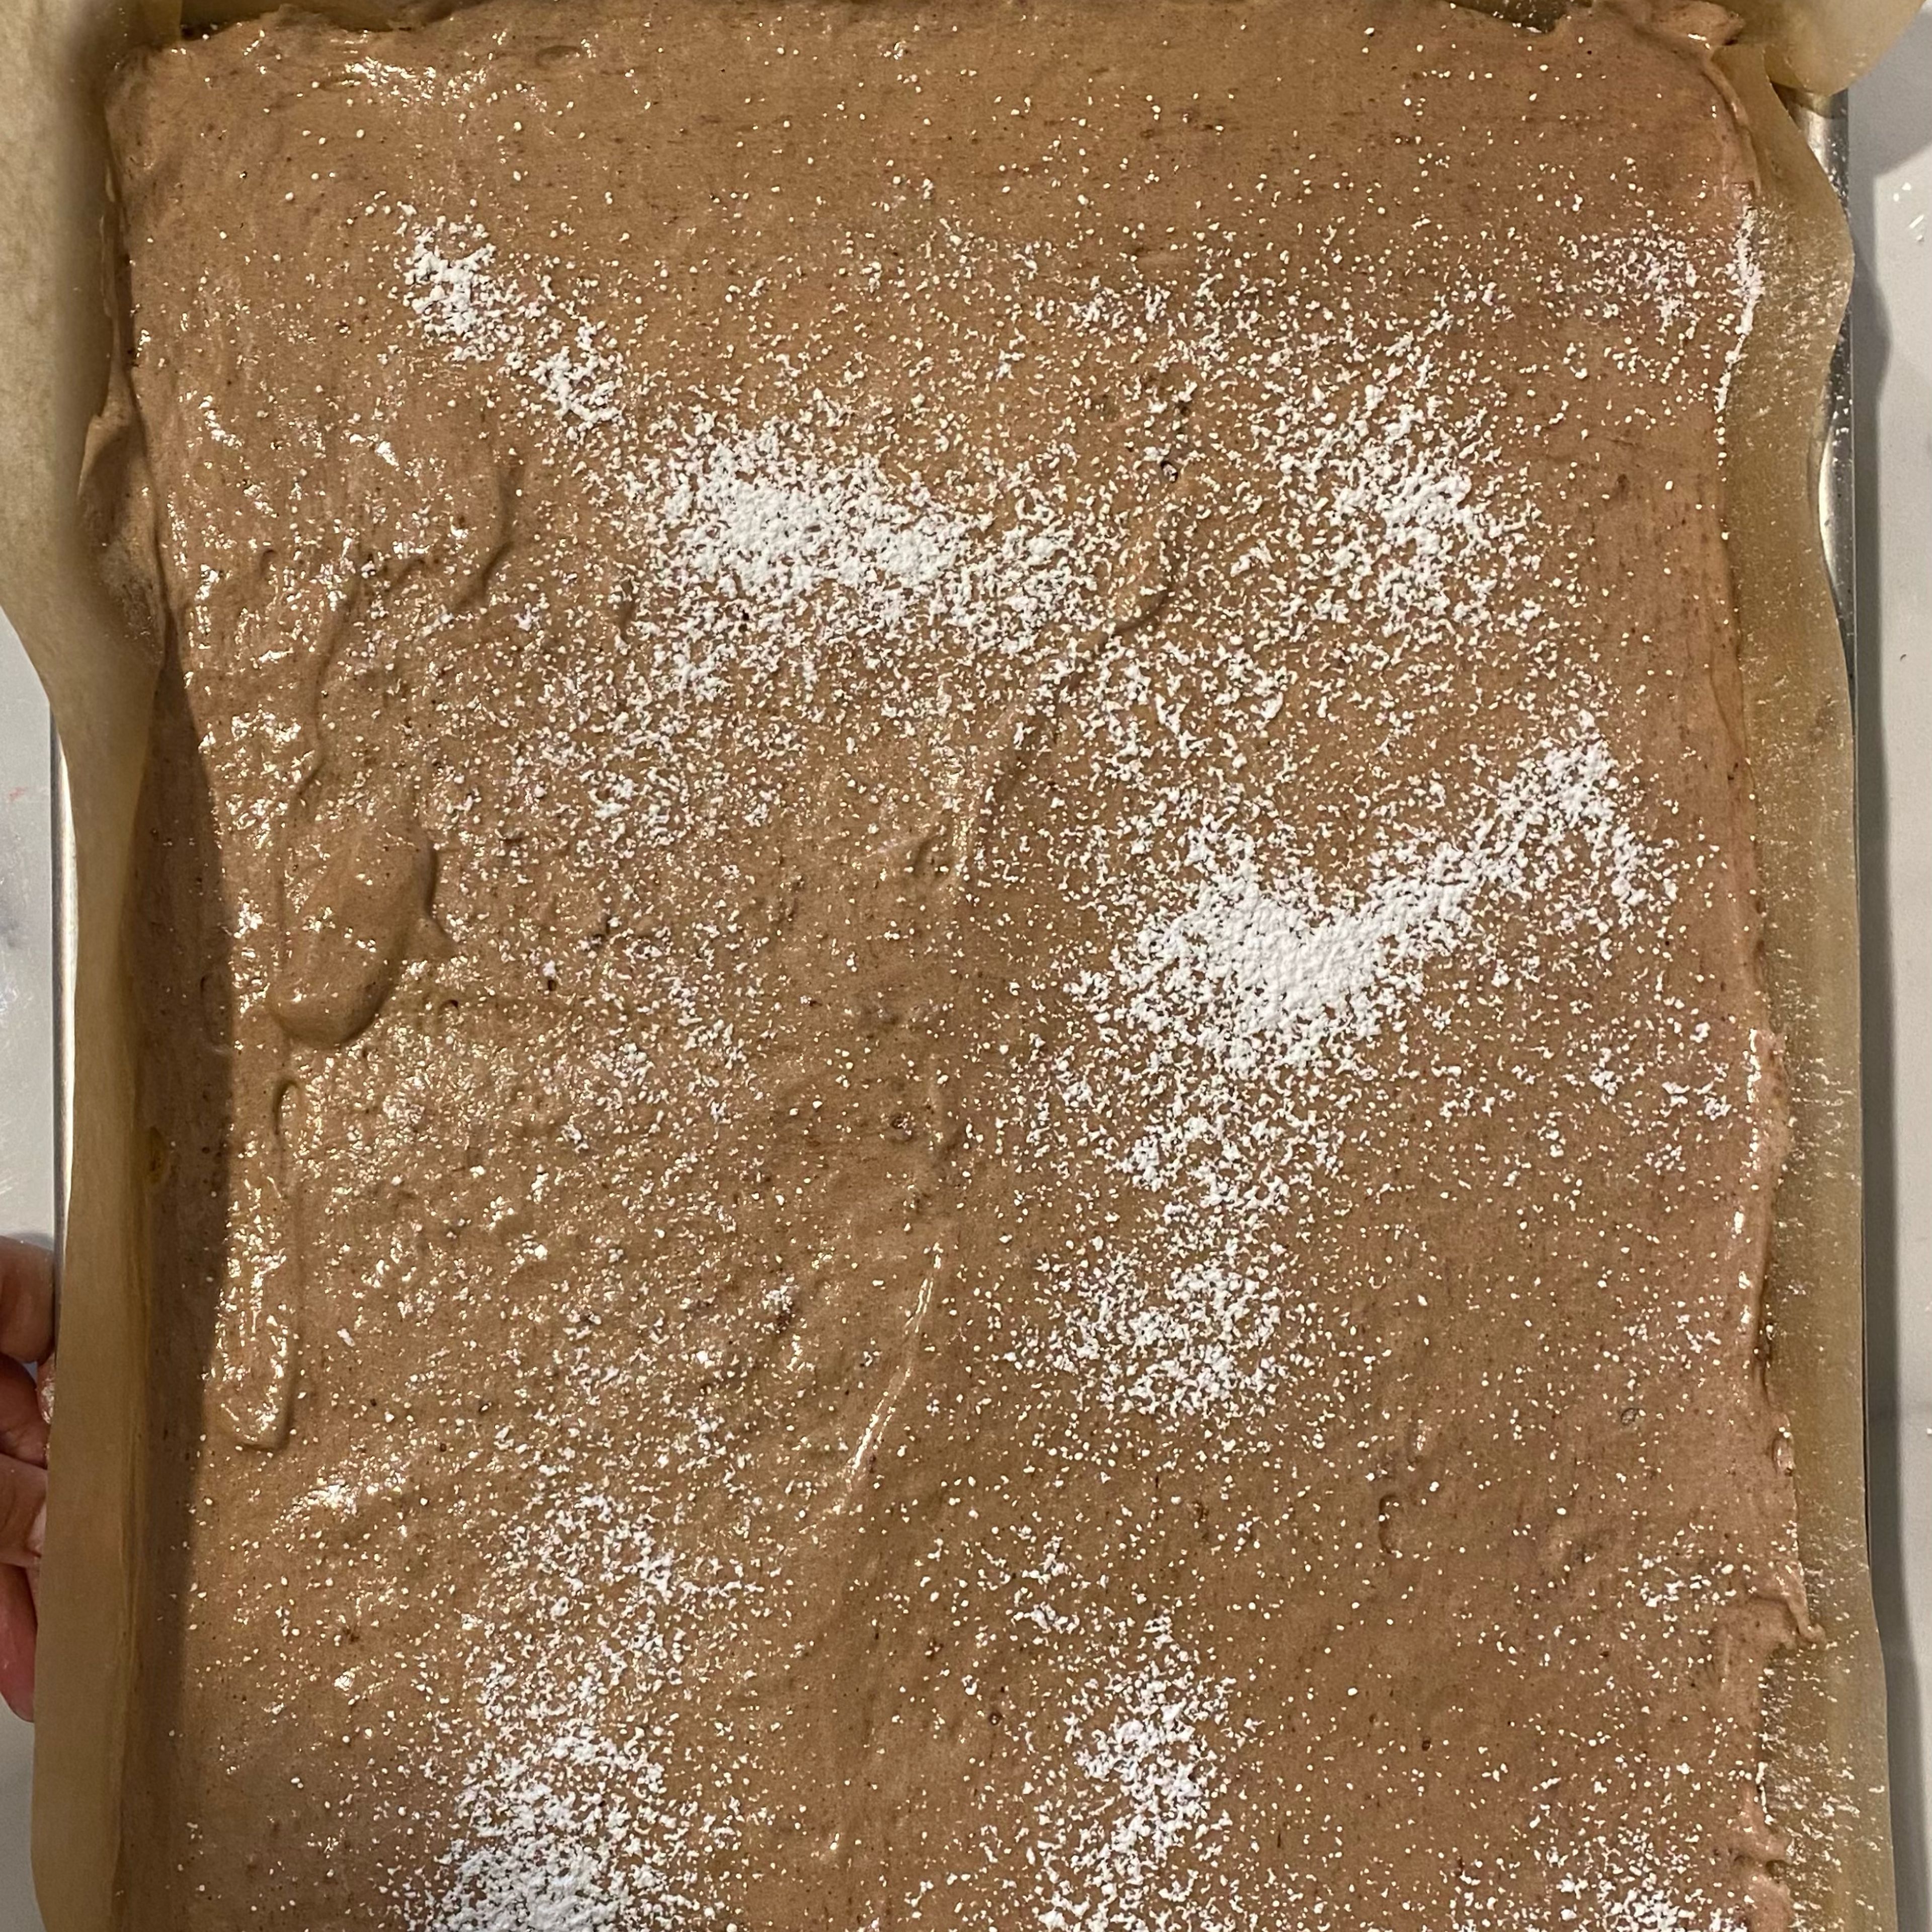 Evenly spread the batter onto a prepared sheet pan. Avoid overworking the batter and deflating it. Dust the batter with a little bit of confectioner's sugar (optional). Bake the cake for about 15-18 minutes, or until the edges are springy to the touch, and a skewer comes out clean. 